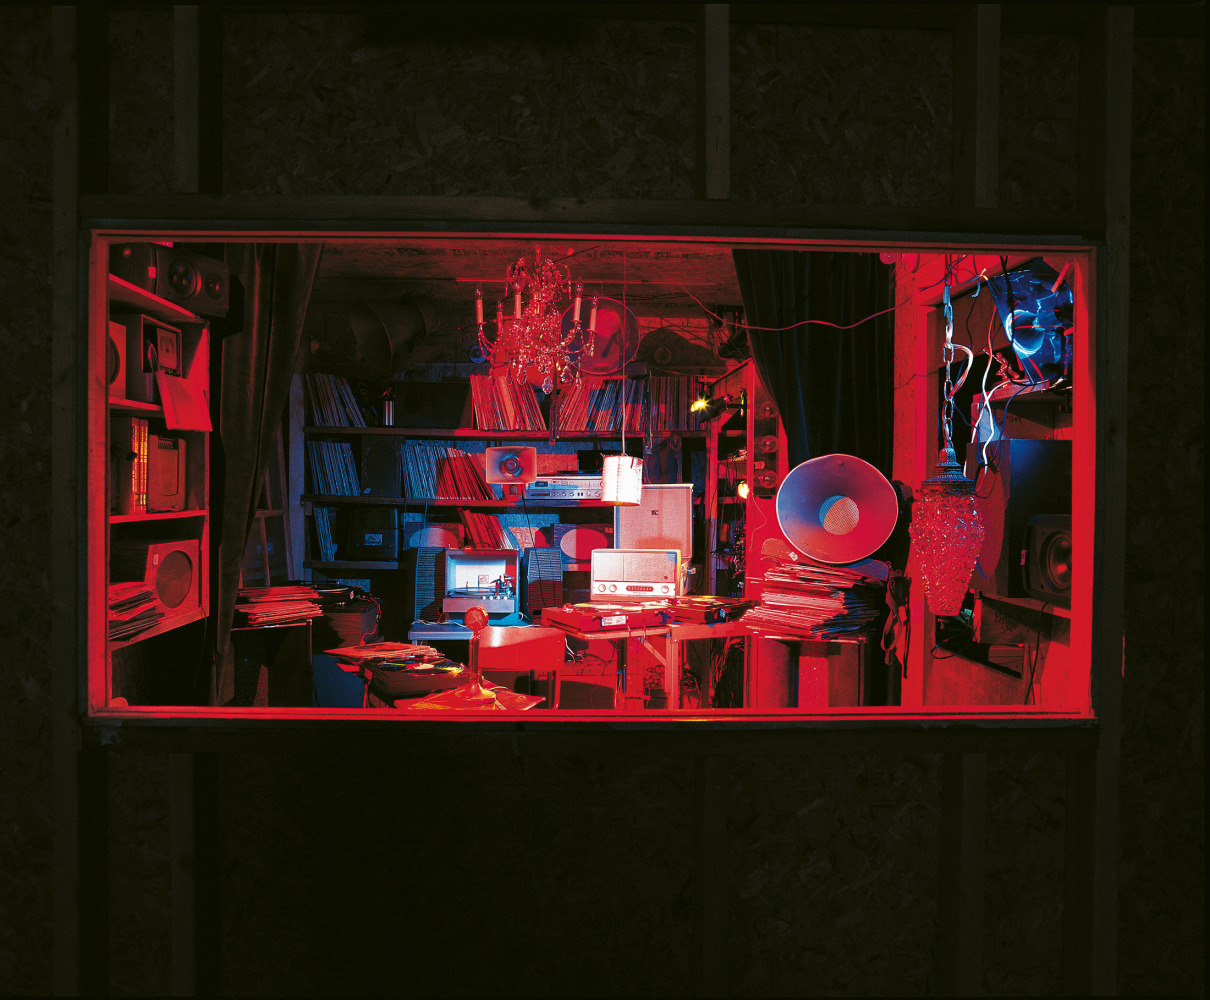 Janet Cardiff and George Bures Miller
Opera for a Small Room, 2005
Mixed media installation with sound and synchronized lighting
Duration: 20 mintes, loop
102 2/5 x 118 x 177 inches
(206.1 x 299.7 x 449.6 cm)